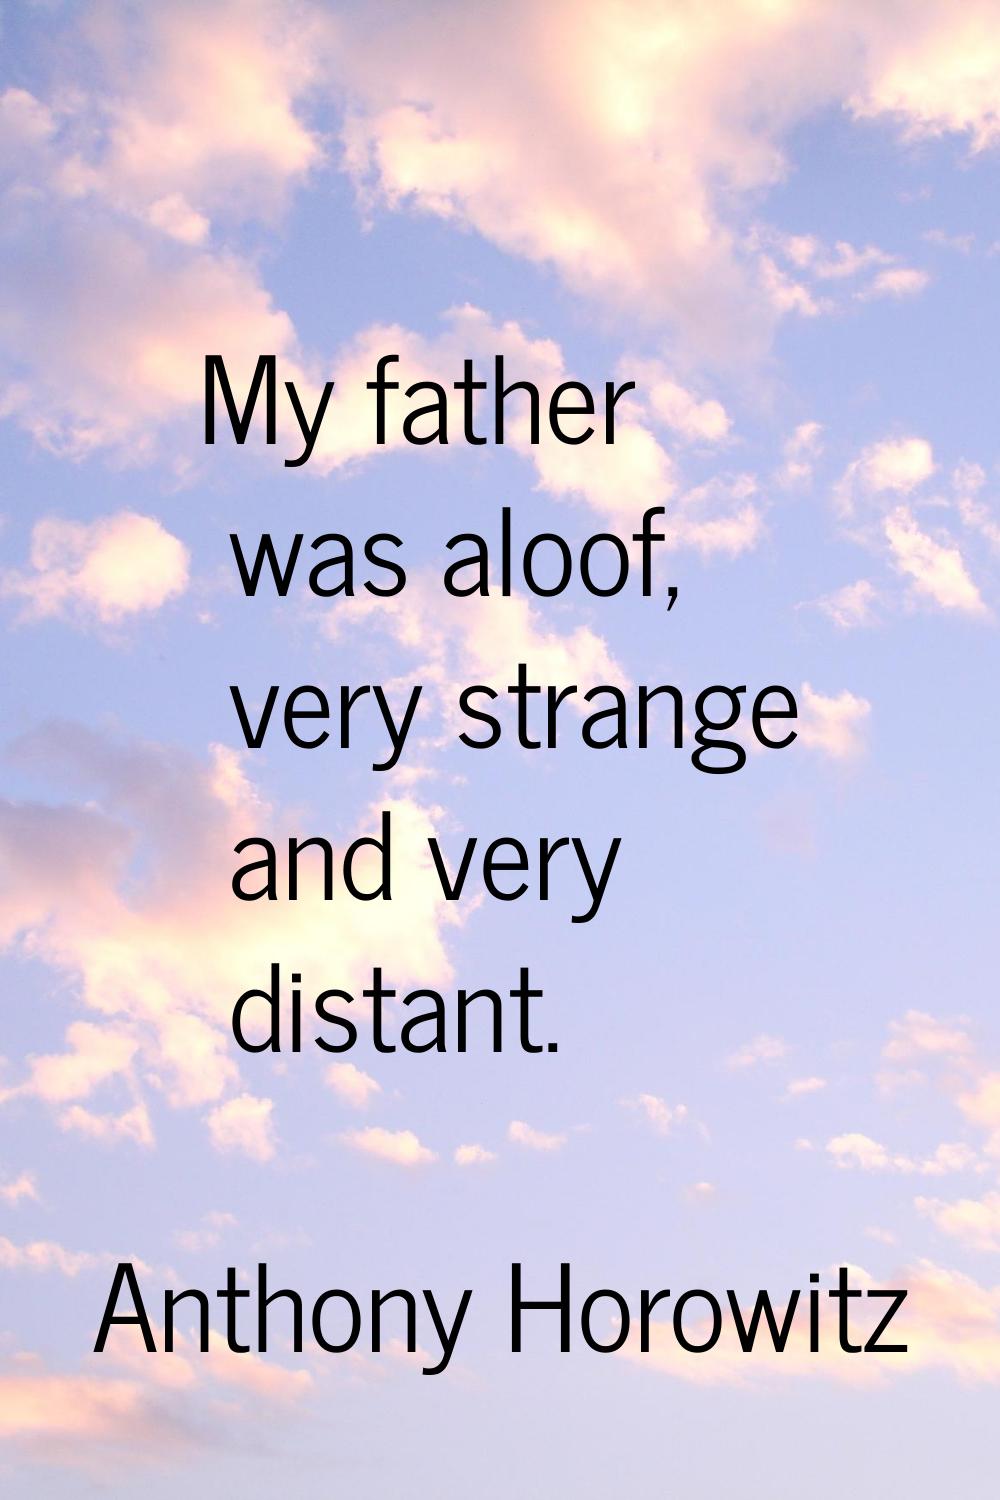 My father was aloof, very strange and very distant.